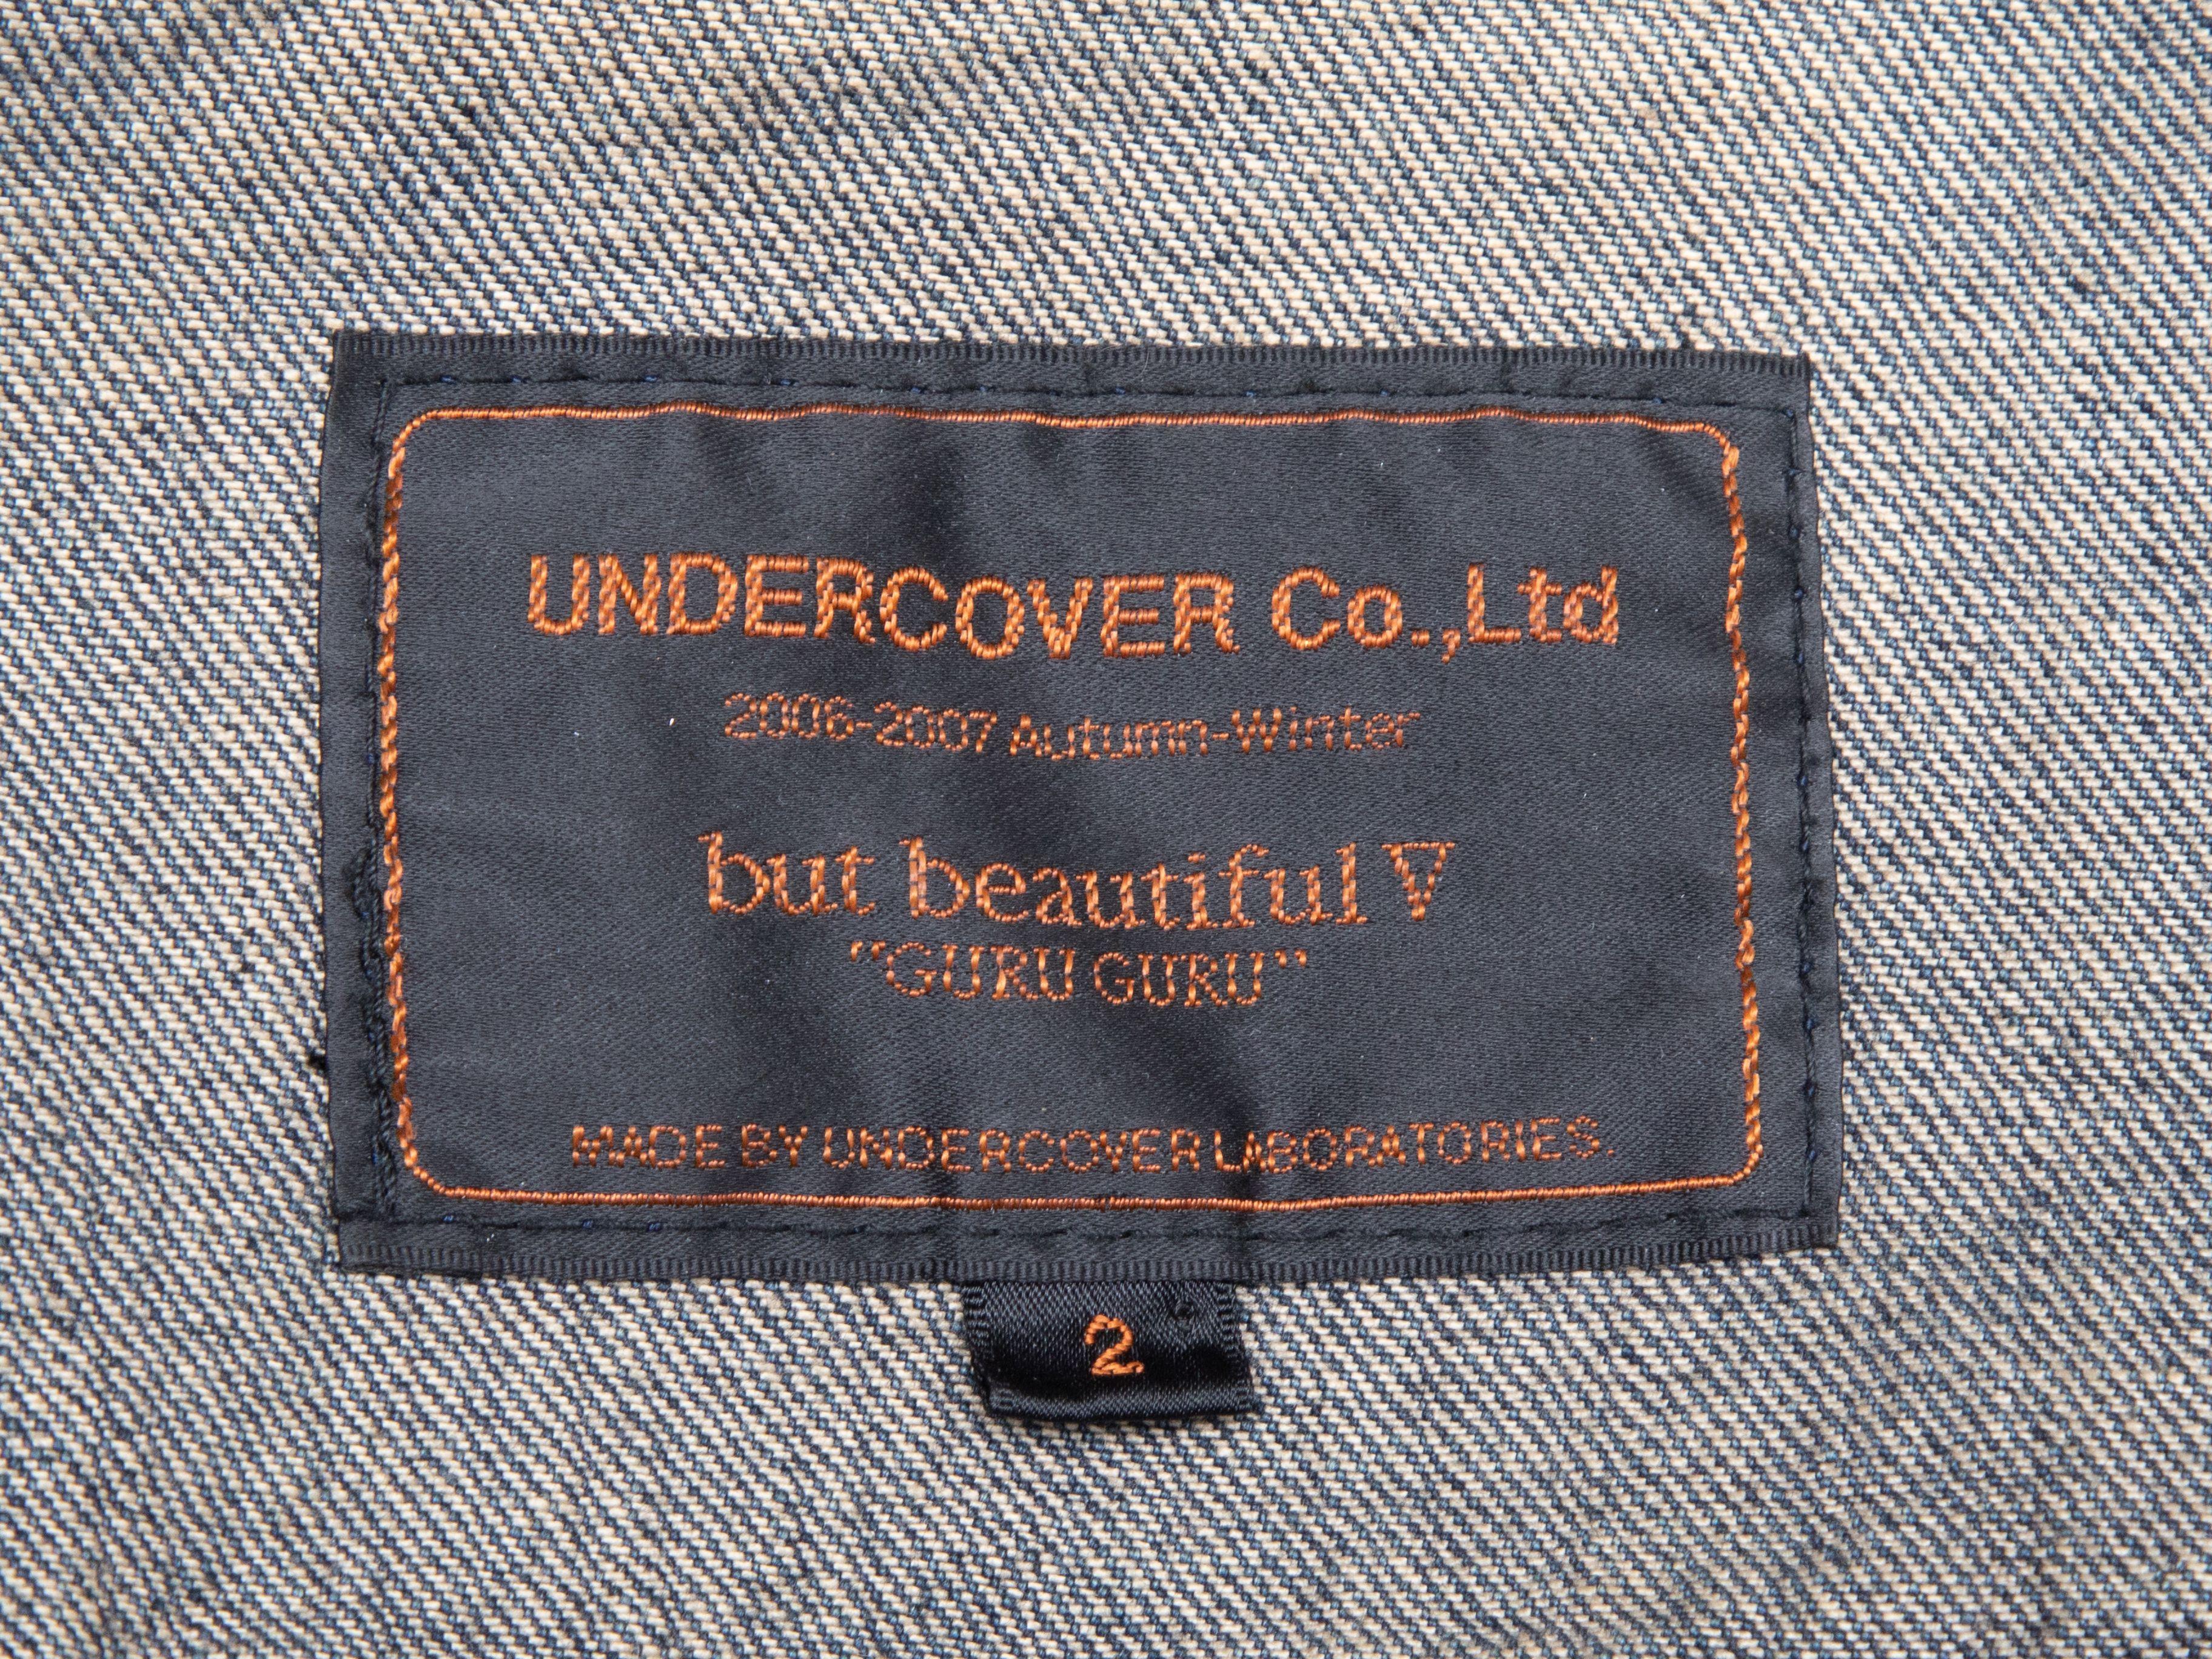 Product Details: Dark wash embroidered denim jacket by Undercover. From the Fall/Winter 2006-2007 Collection. Pointed collar. Dual flap pockets at bust. Apple motif embroidery at back. Zip closure at center front. 36